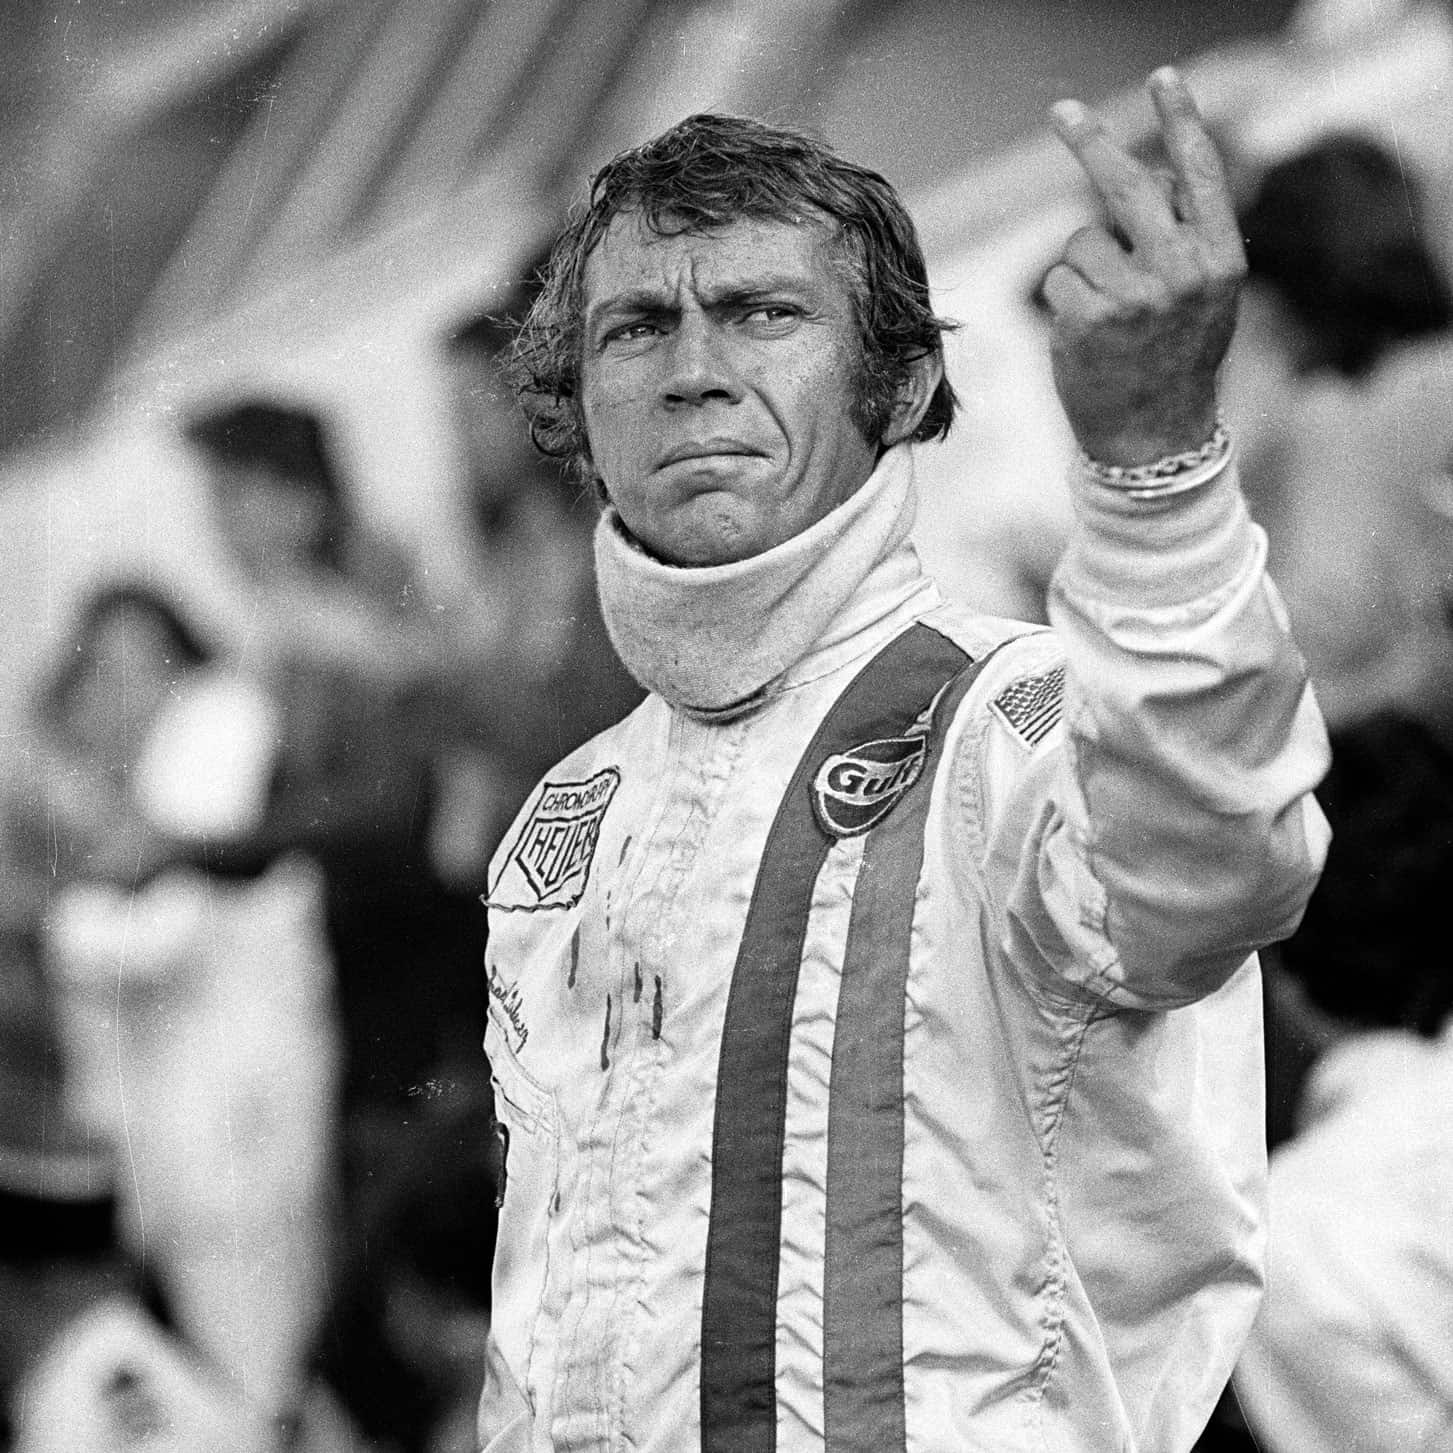 Steve McQueen’s hold up two fingers